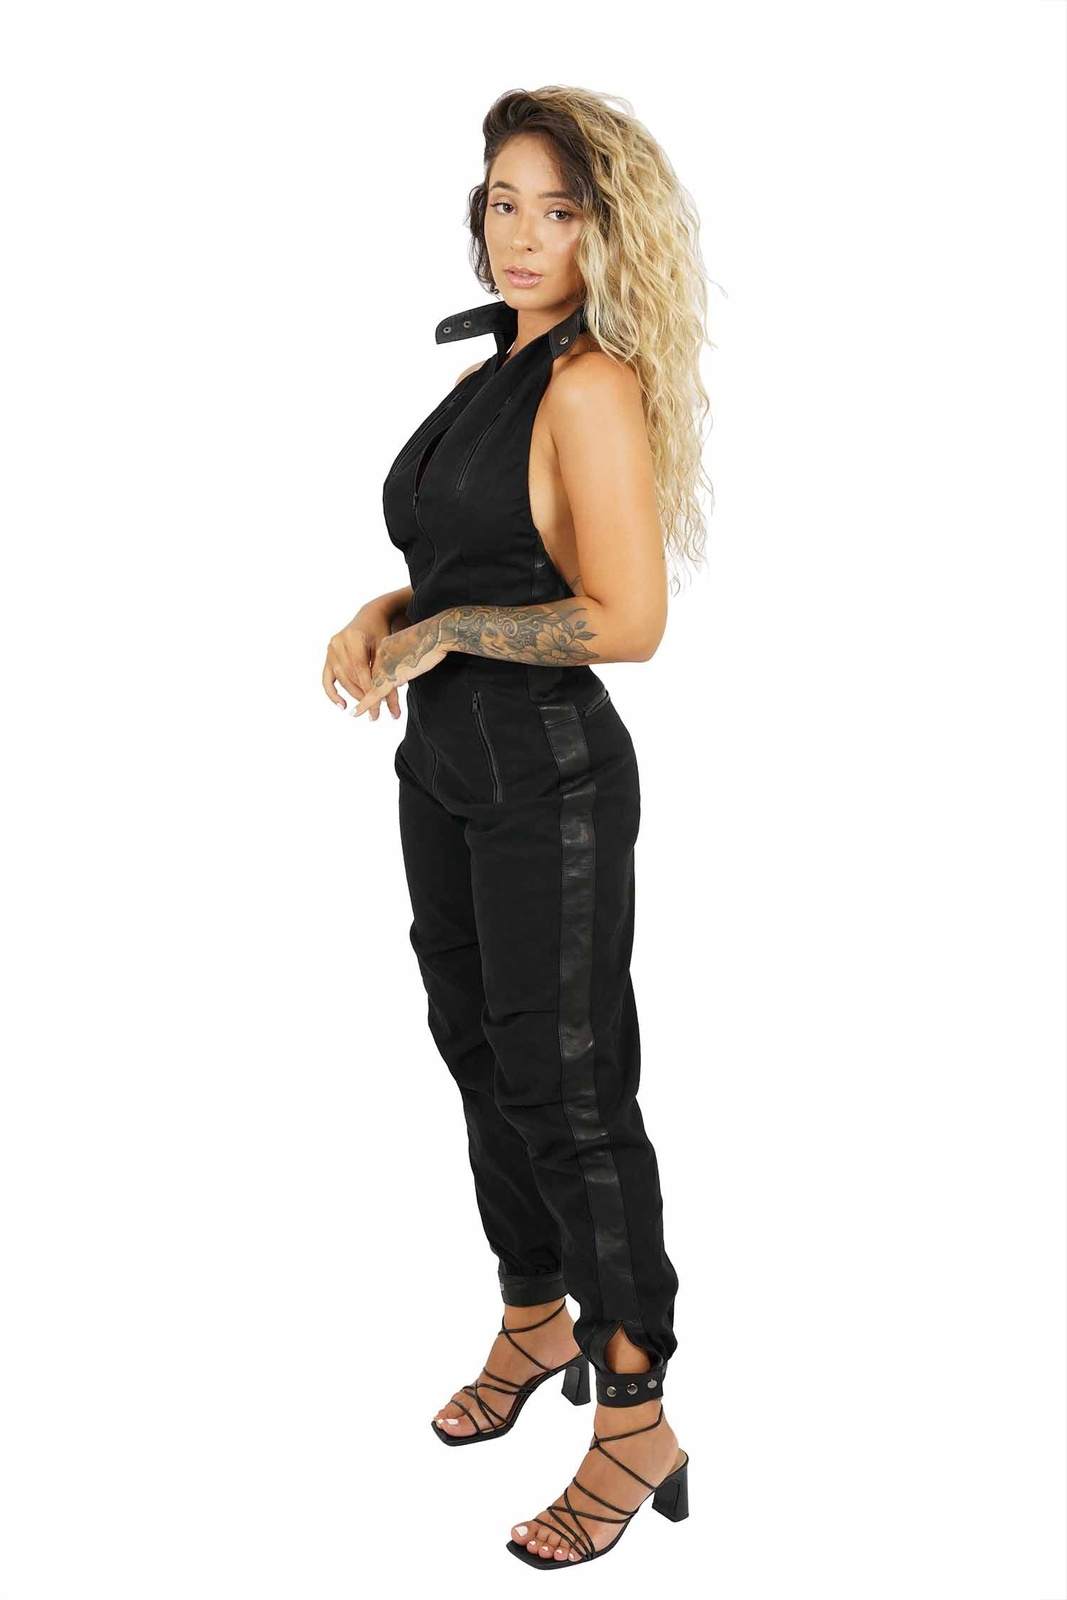 jumpsuit with zip front from Love Khaos